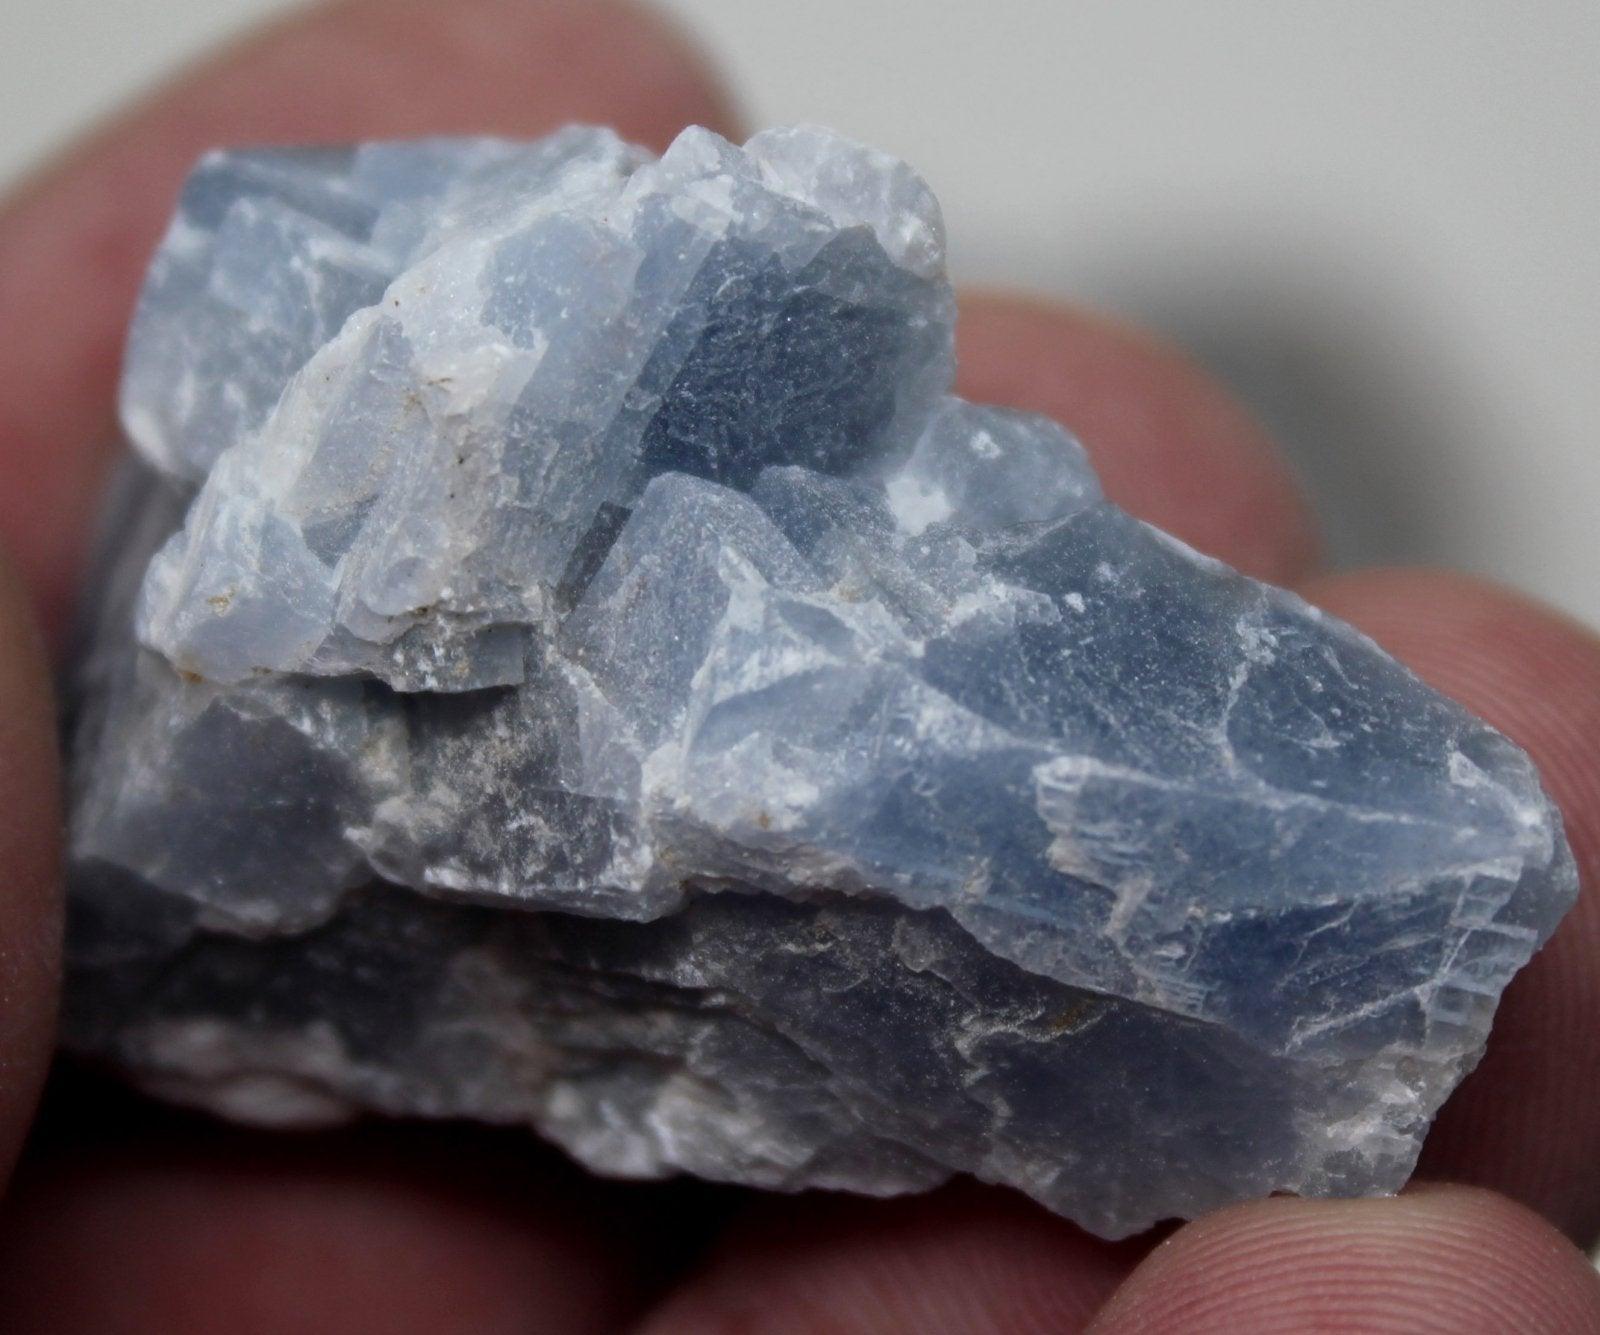 ONE Blue Calcite Crystal! Calcium Carbonate Crystal Formation! - LapidaryCentral